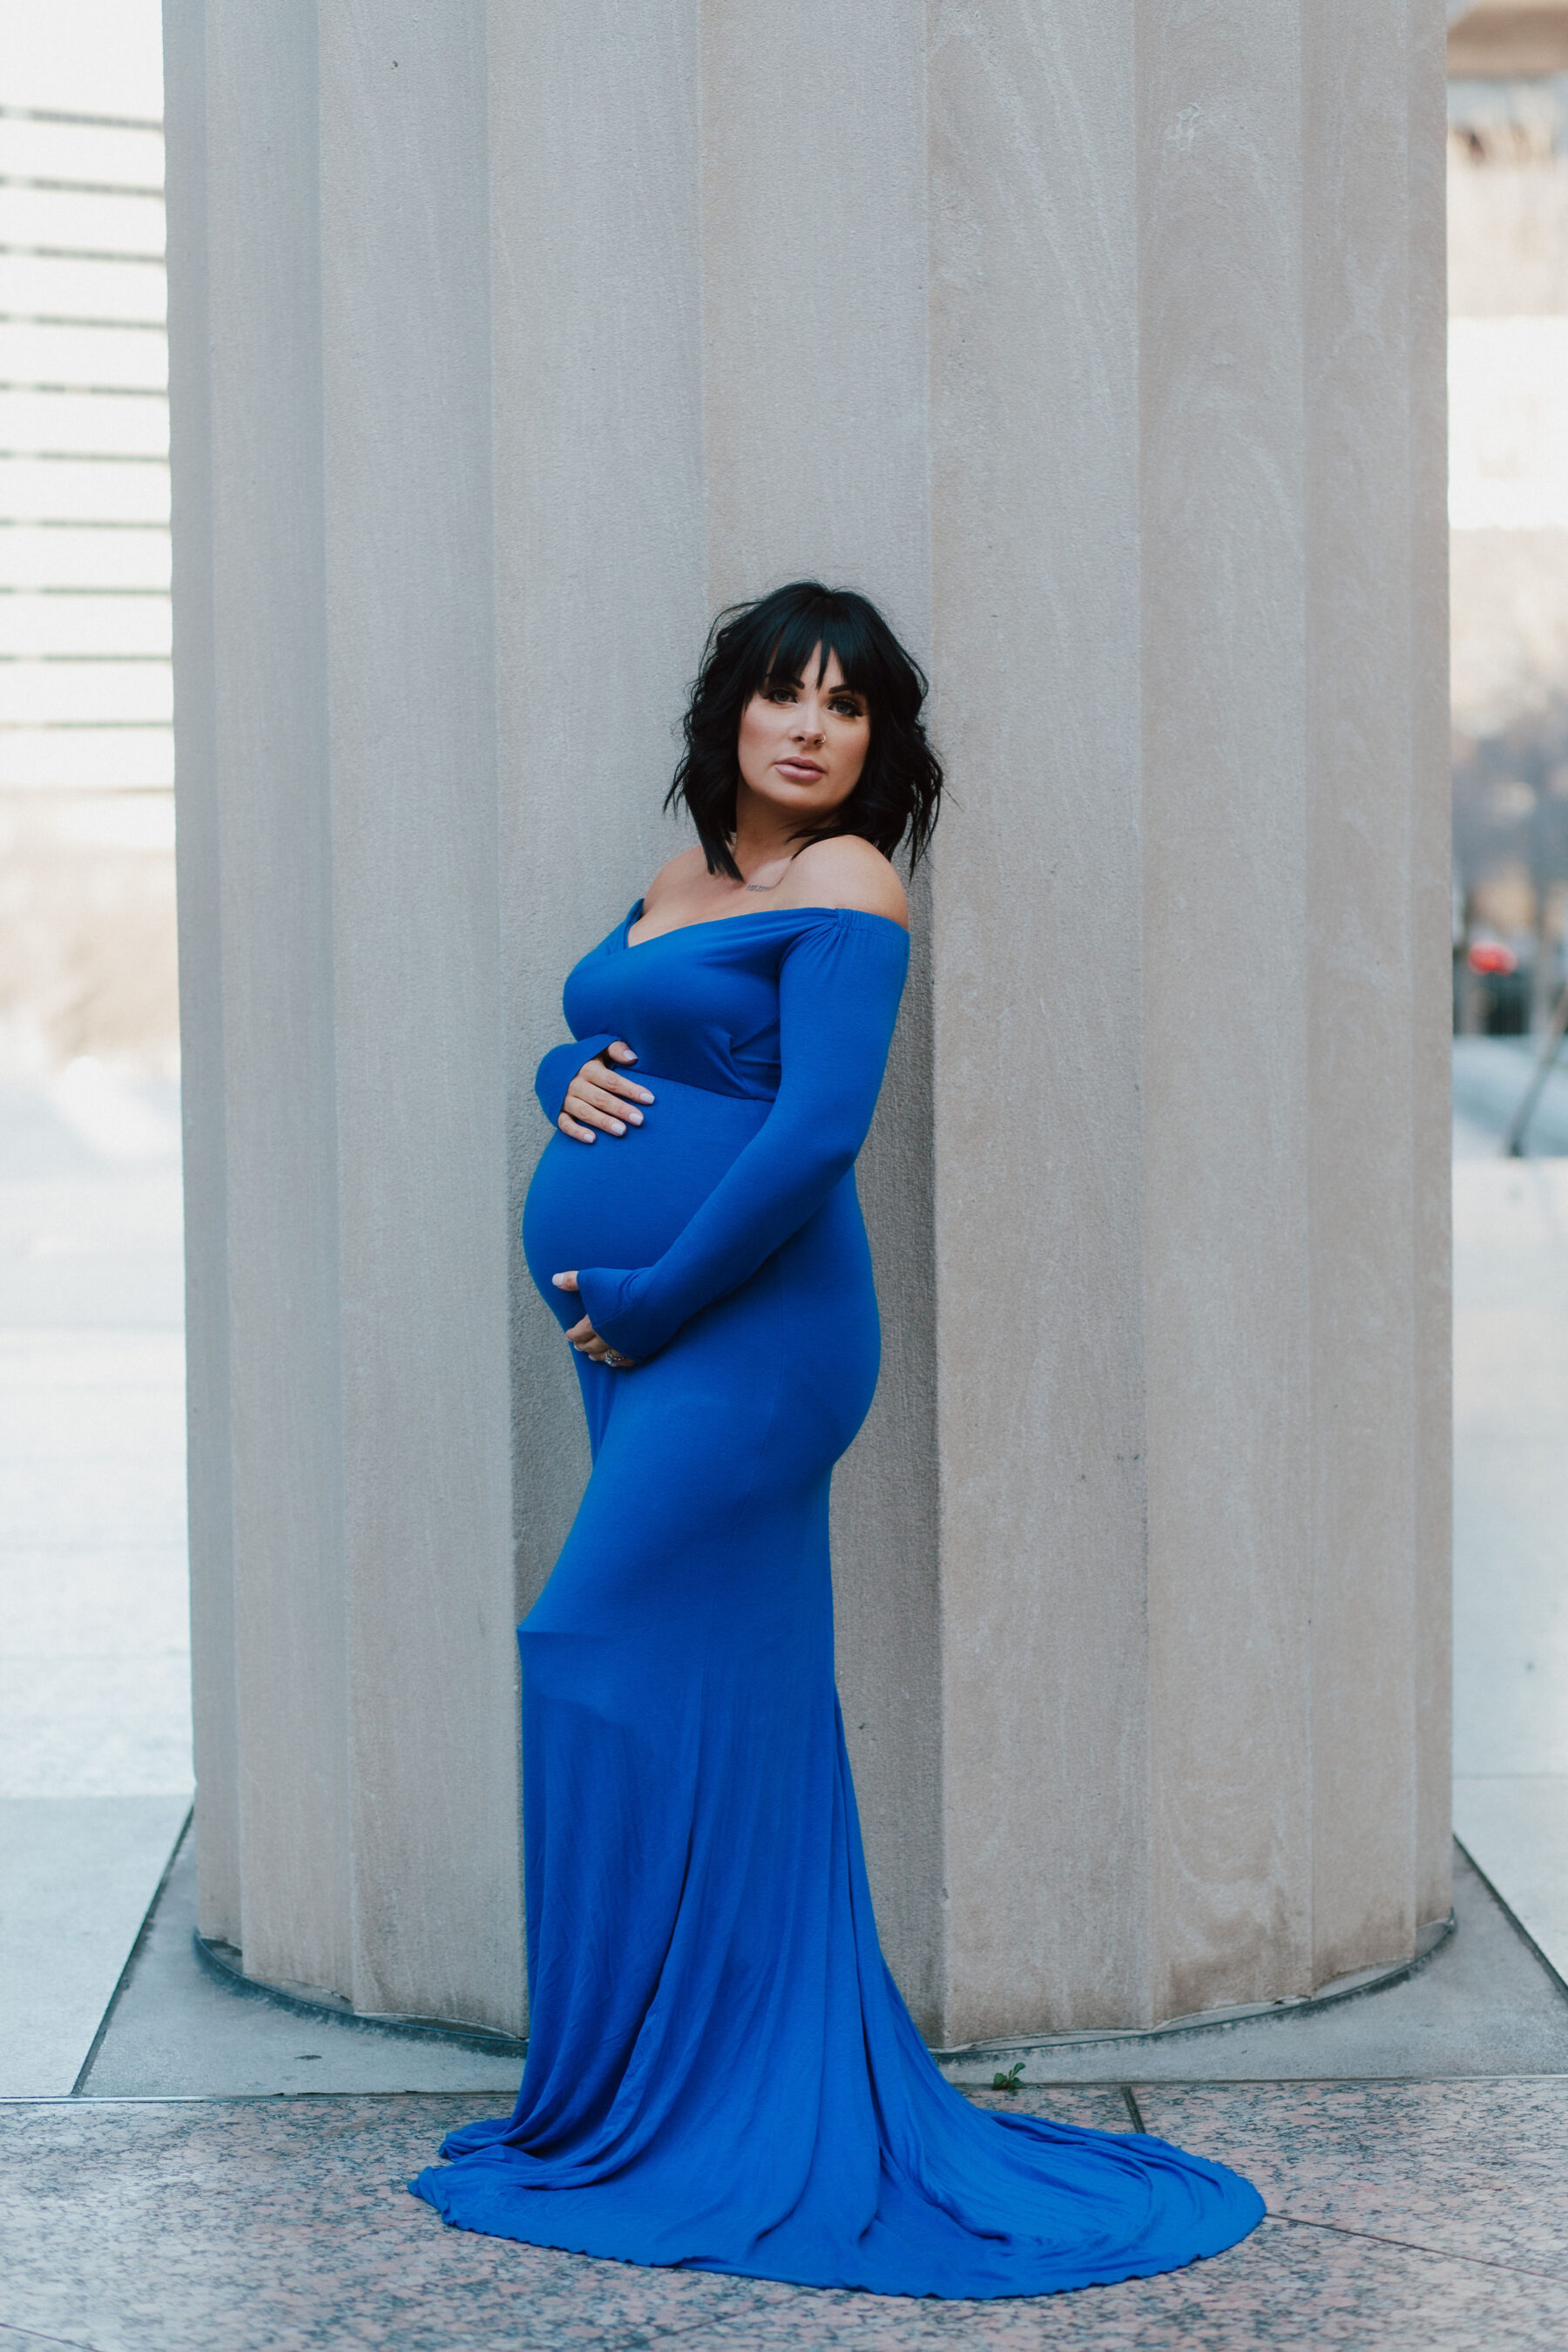 Glowing Maternity Session by Sincerely Lindsay